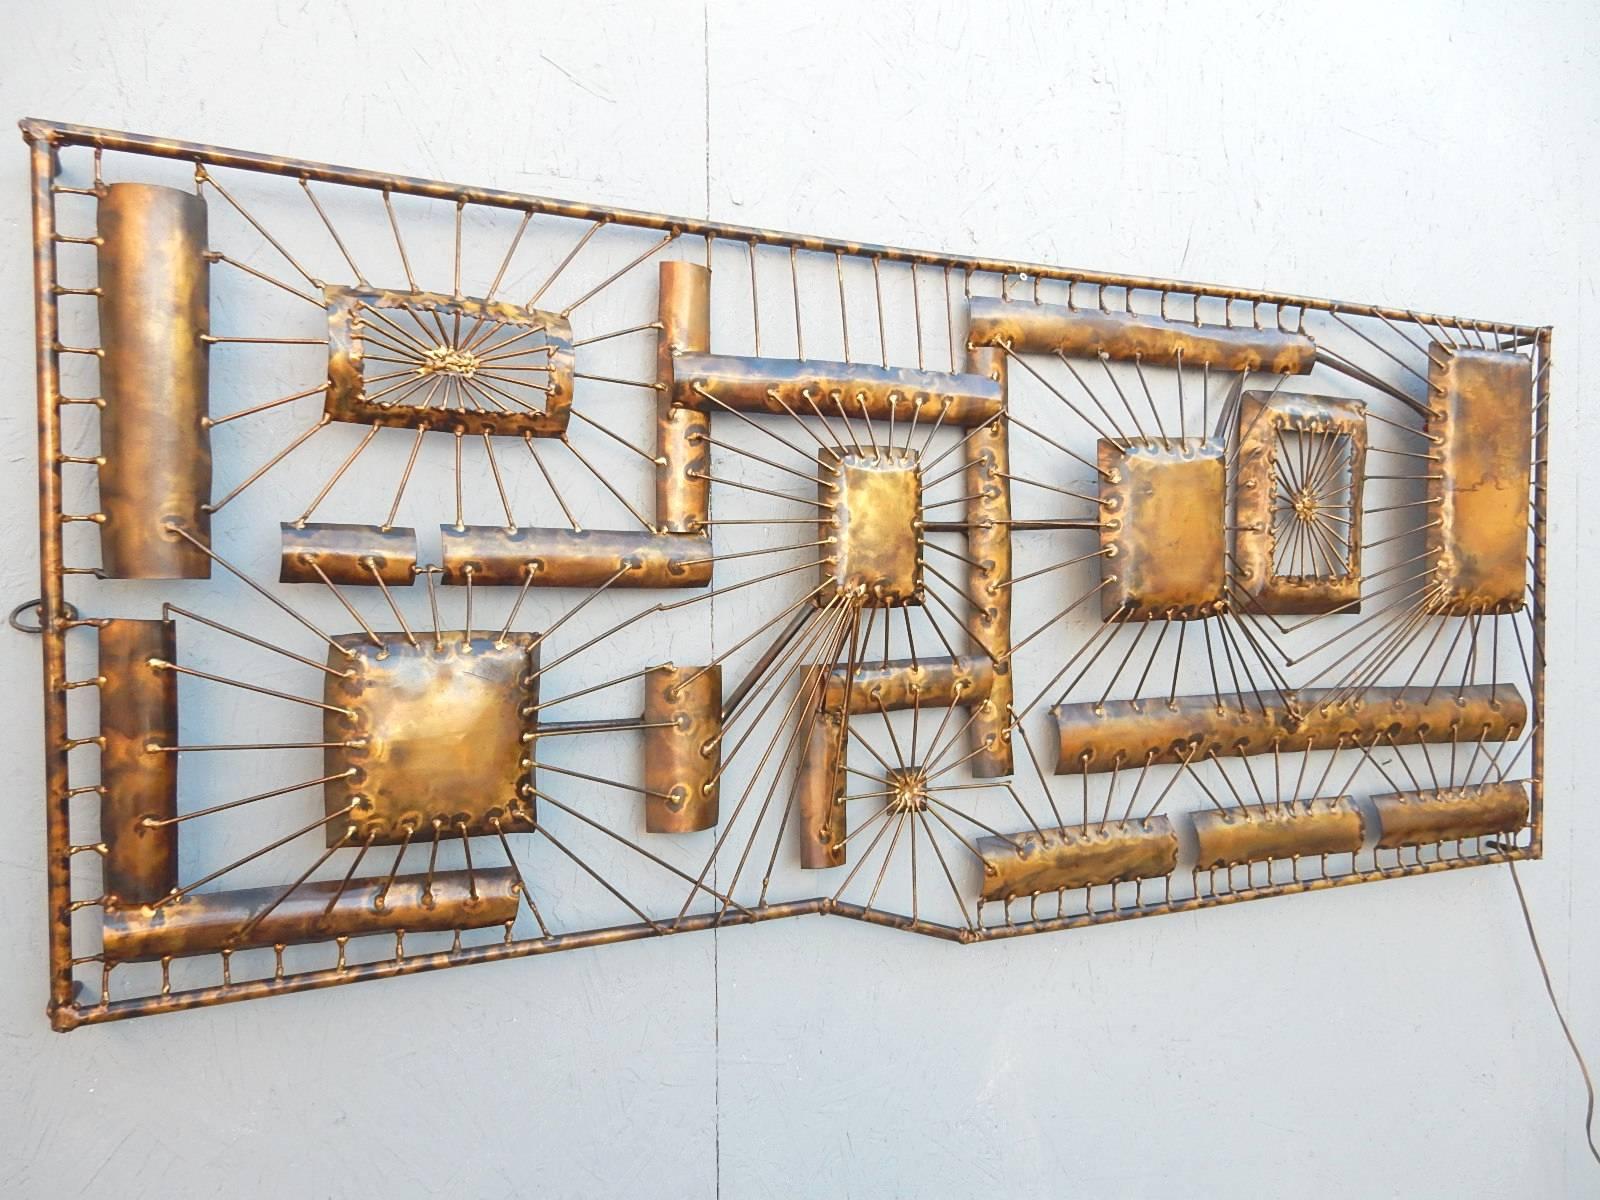 Large sofa size welded brass abstract wall sculpture or lamp sconce.
Electrified with four candle size bulbs that illuminate the design.
Fabulous piece, un-signed, circa 1960s.